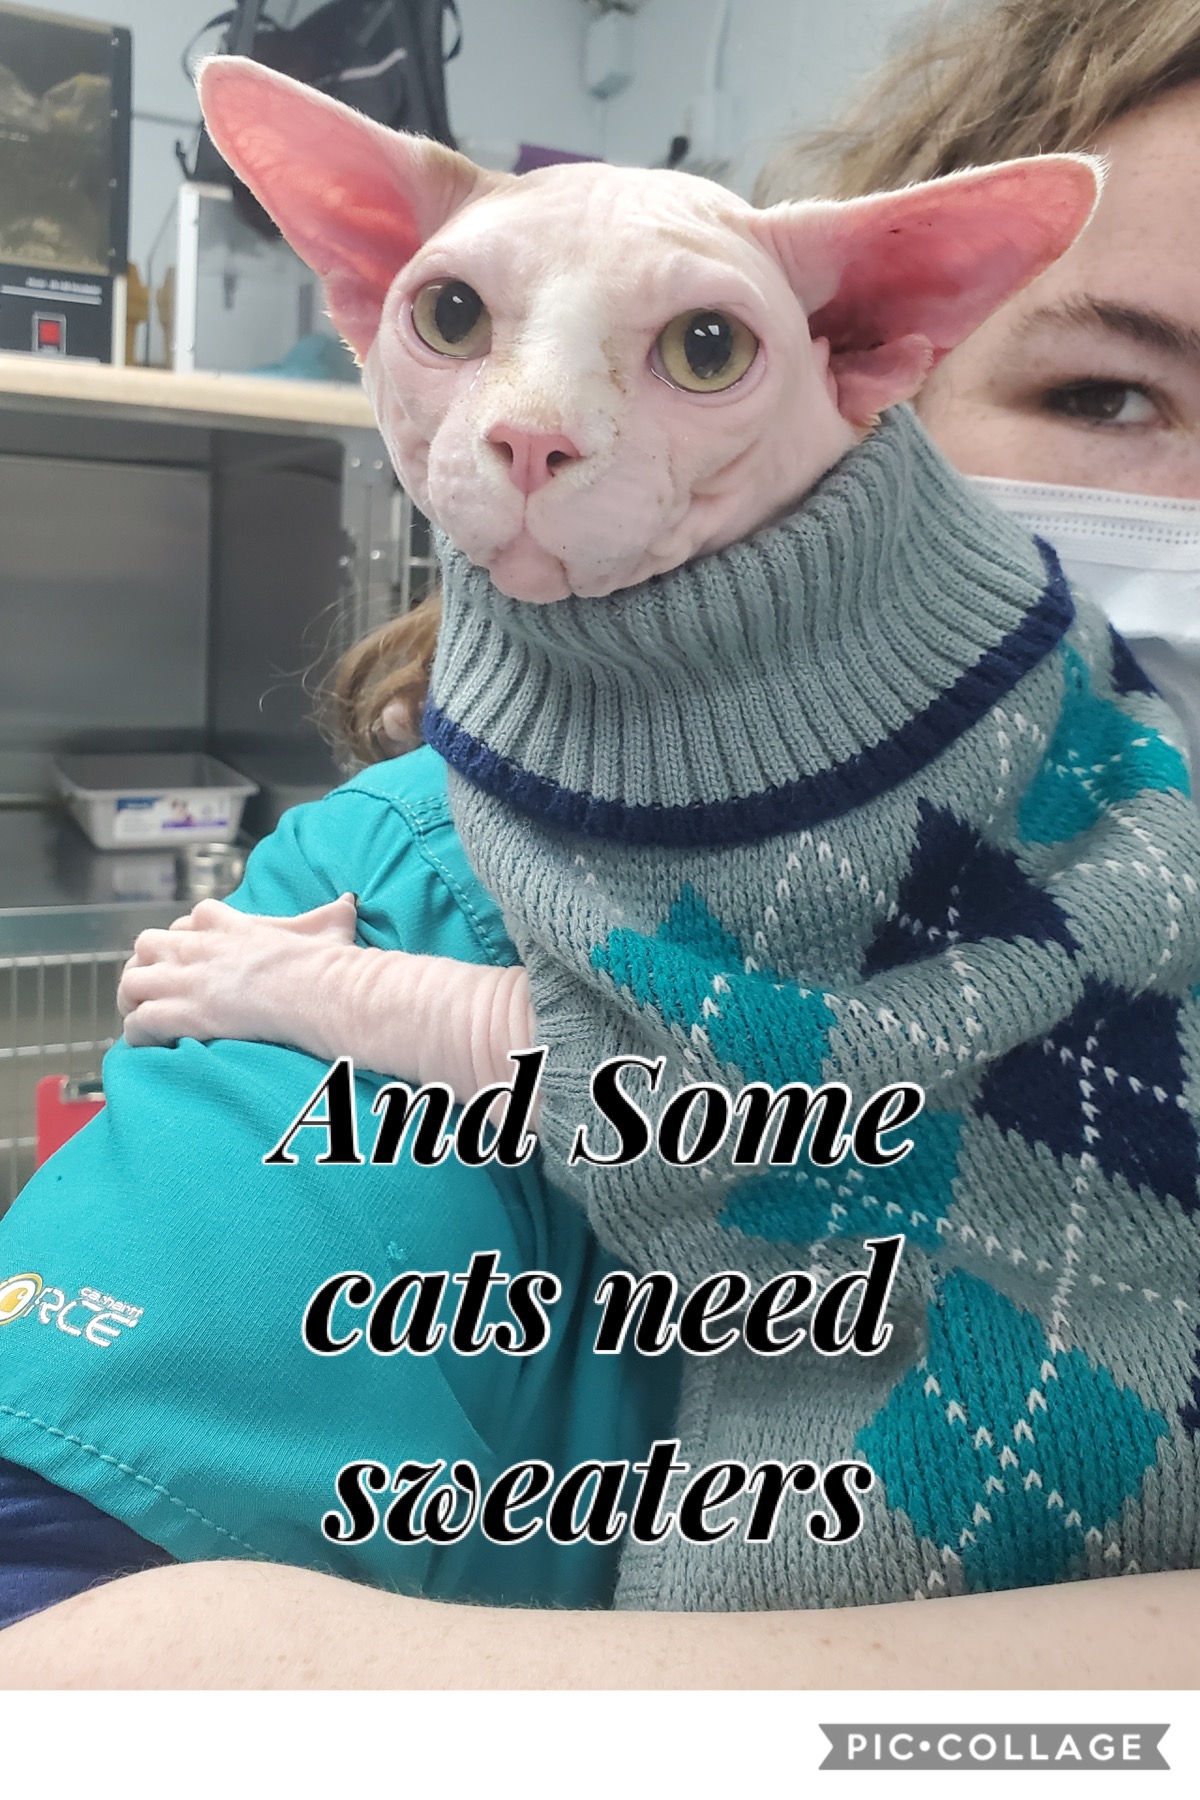 And some cats need sweaters